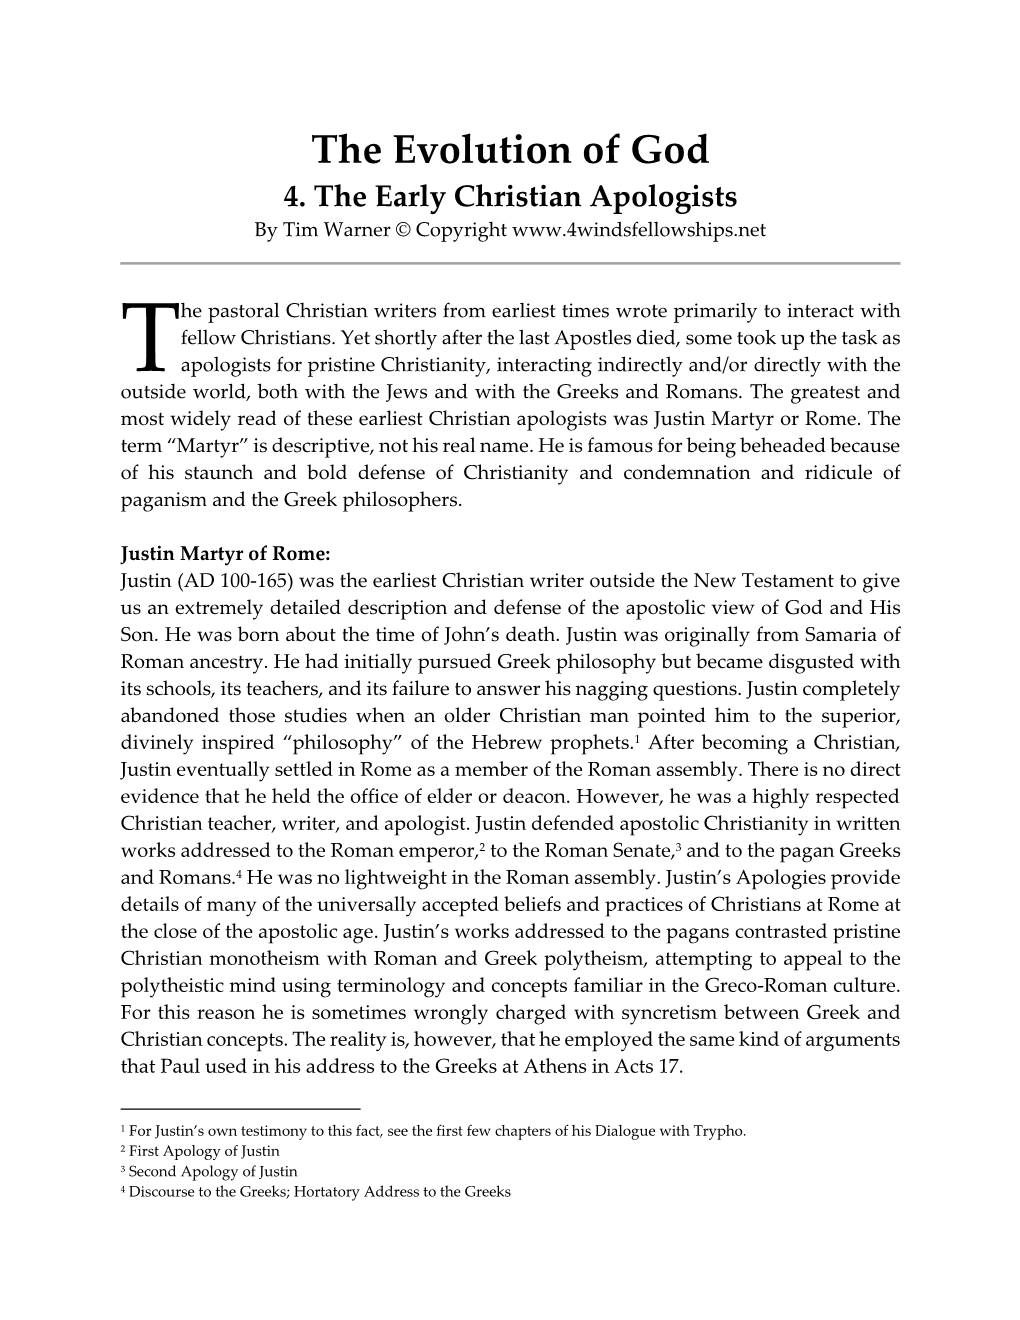 4. the Early Christian Apologists by Tim Warner © Copyright